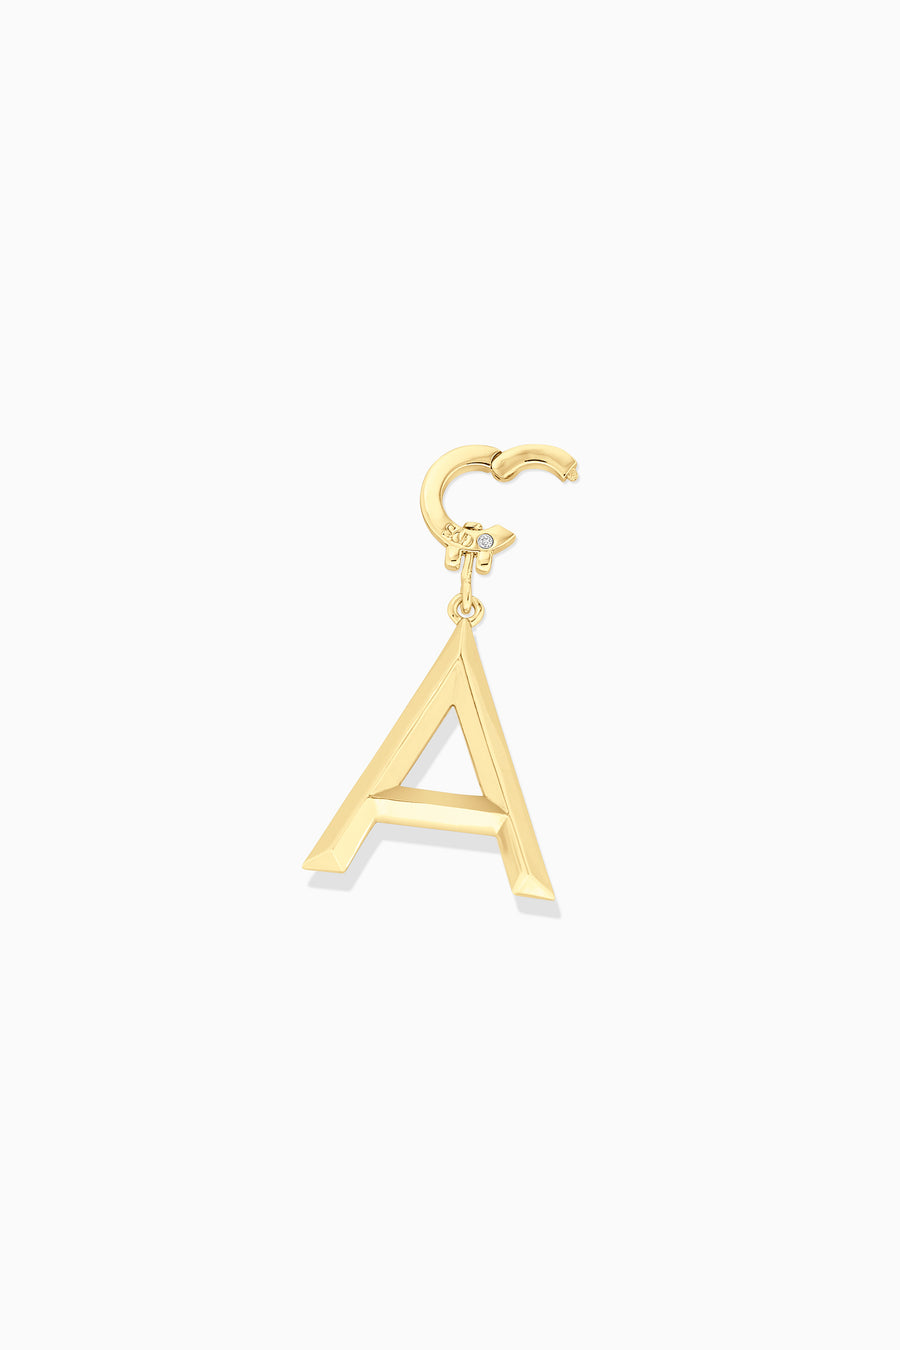 Alphabet Charms With Colors. Small Bezels For Jewelry . Dainty